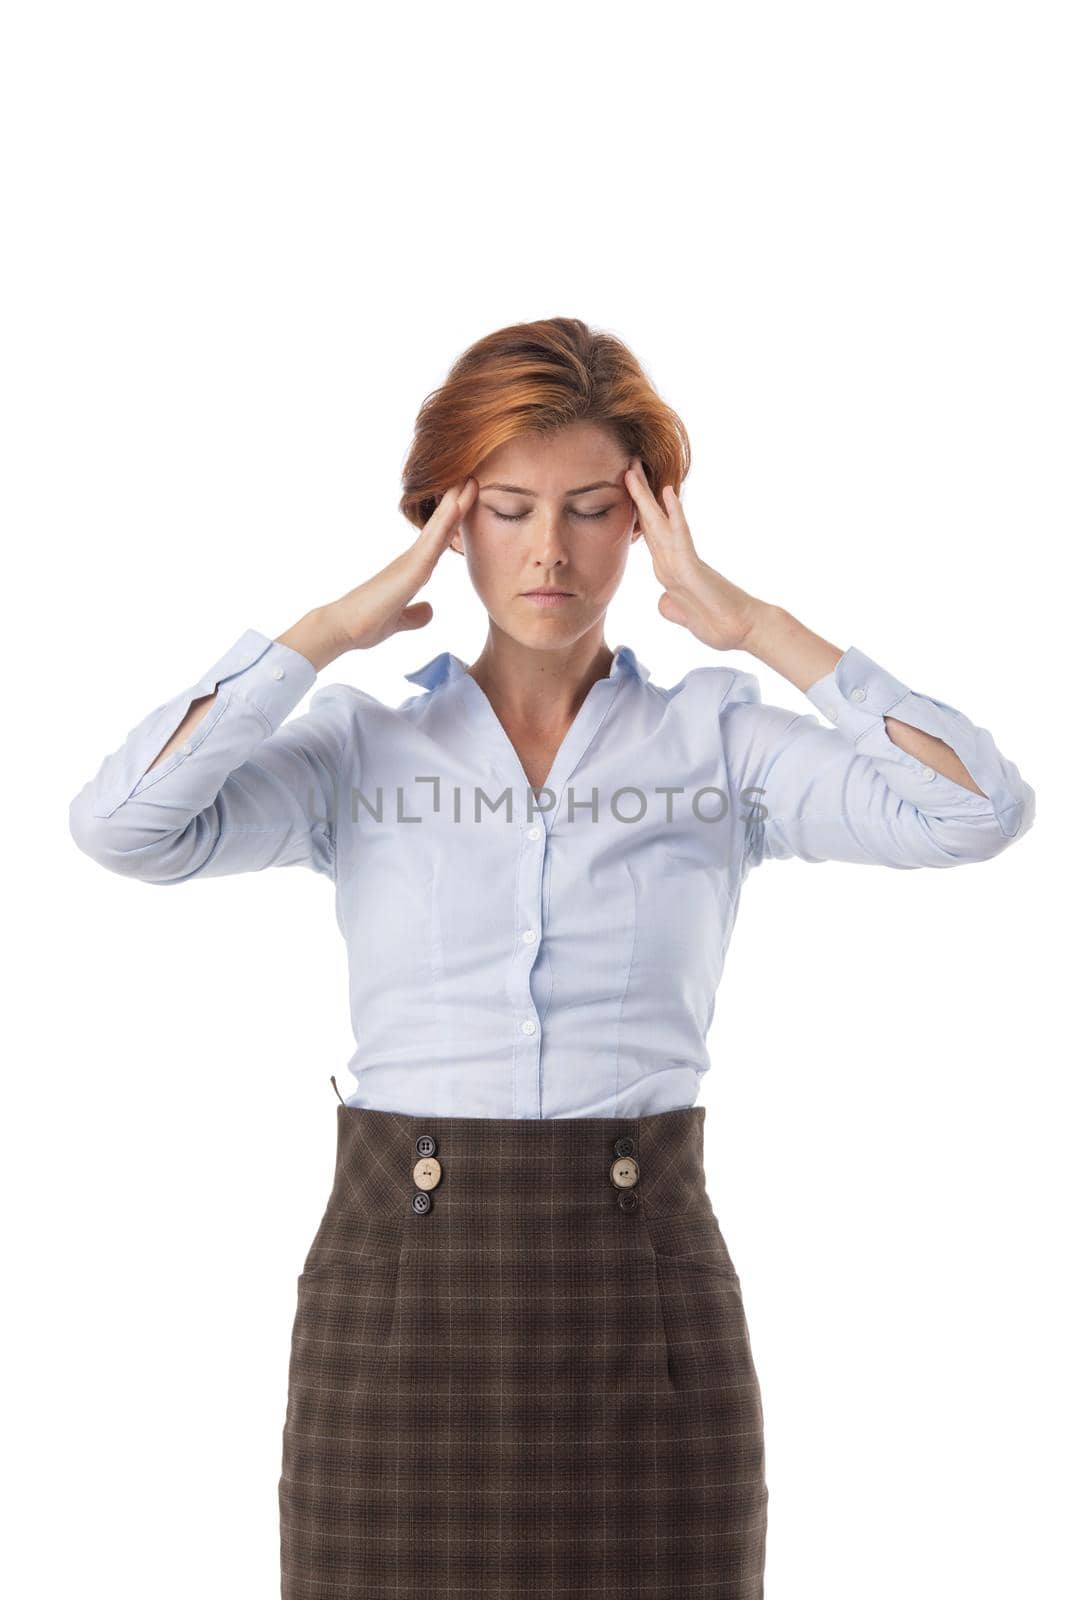 Stressed young business woman by ALotOfPeople